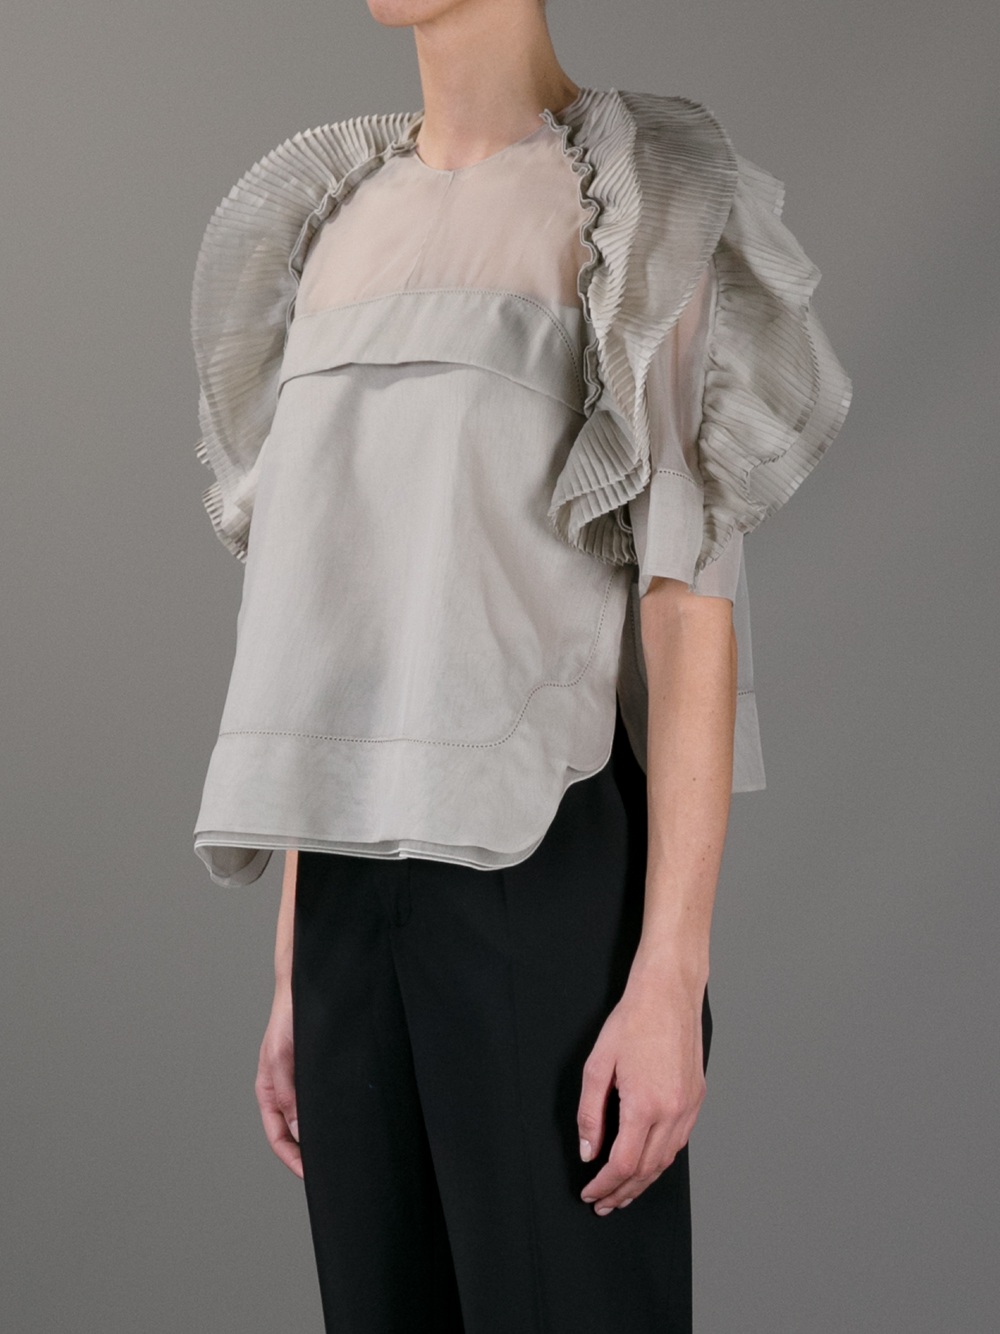 Lyst - Chloé Pleated Ruffle Blouse in Gray